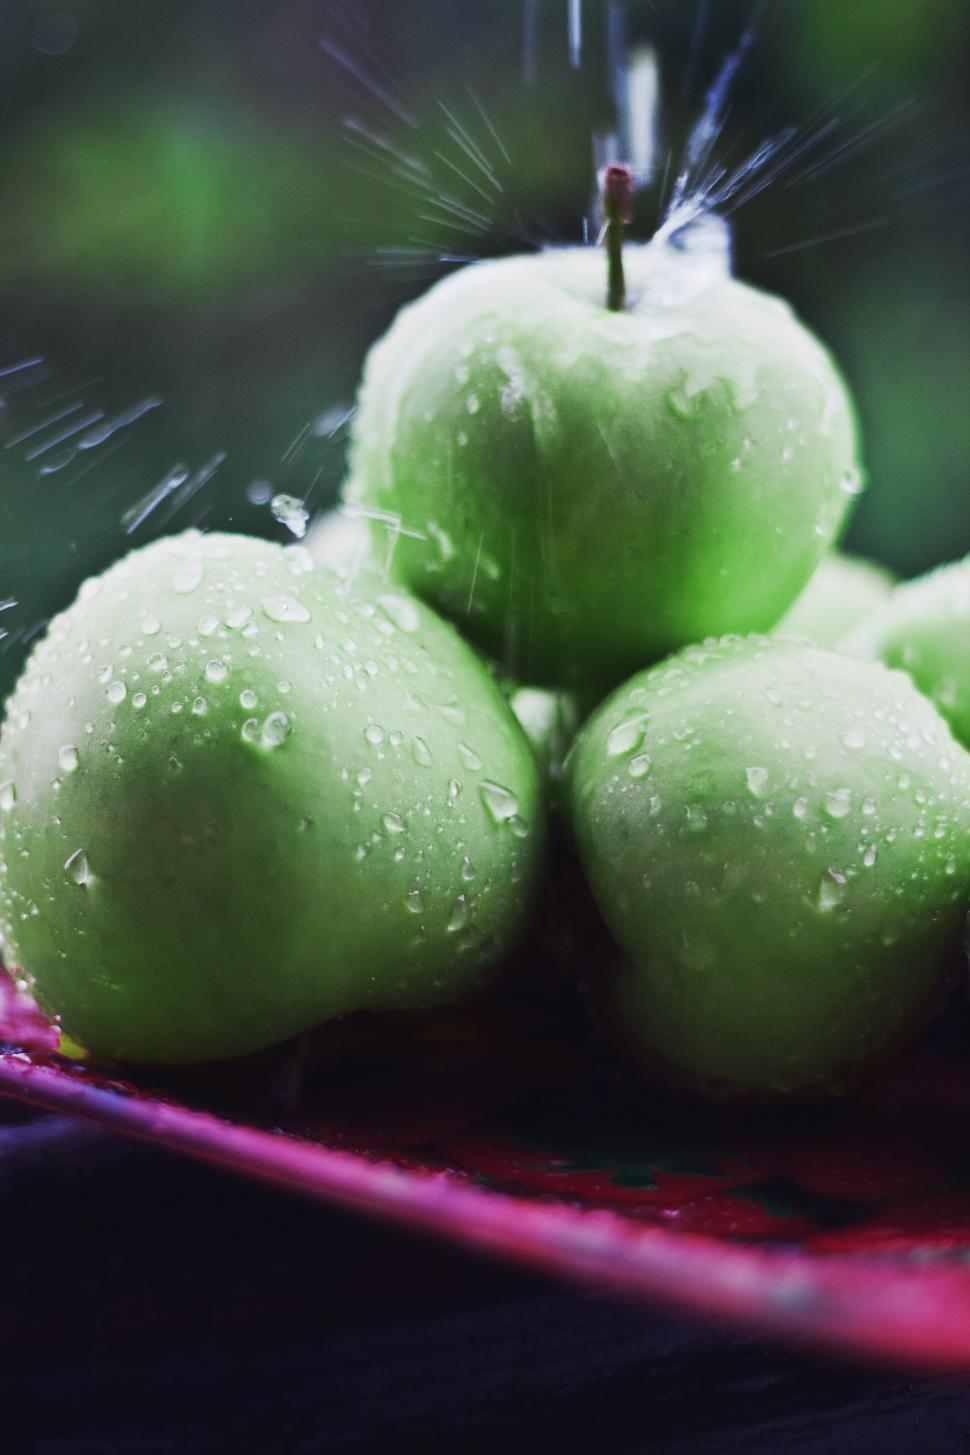 Free Image of Green apples food fruit healthy raindrope snack water apple granny smith eating apple fruit edible fruit produce pome food grape healthy sweet diet fresh health juicy apples vitamin natural nutrition ripe delicious snack eat 